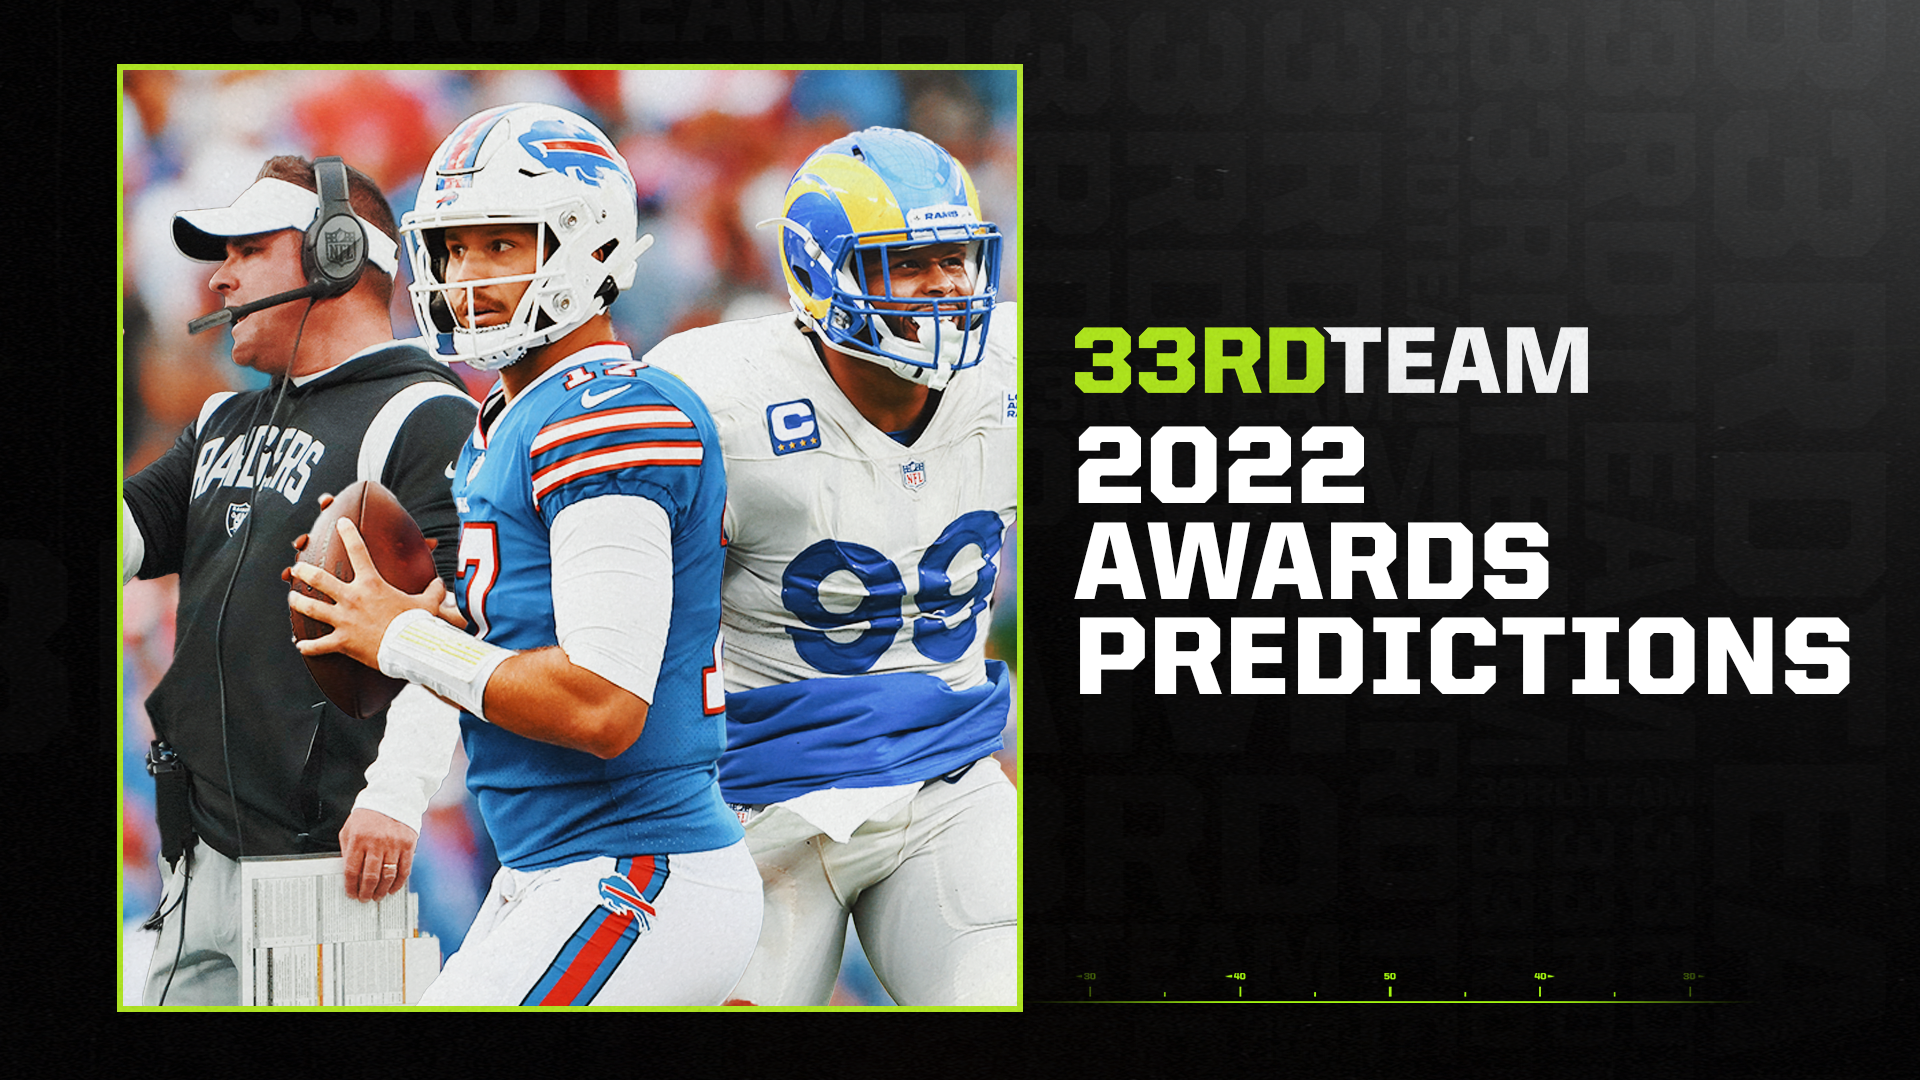 2022 NFL Awards Predictions: MVP, Rookies of the Year, and More